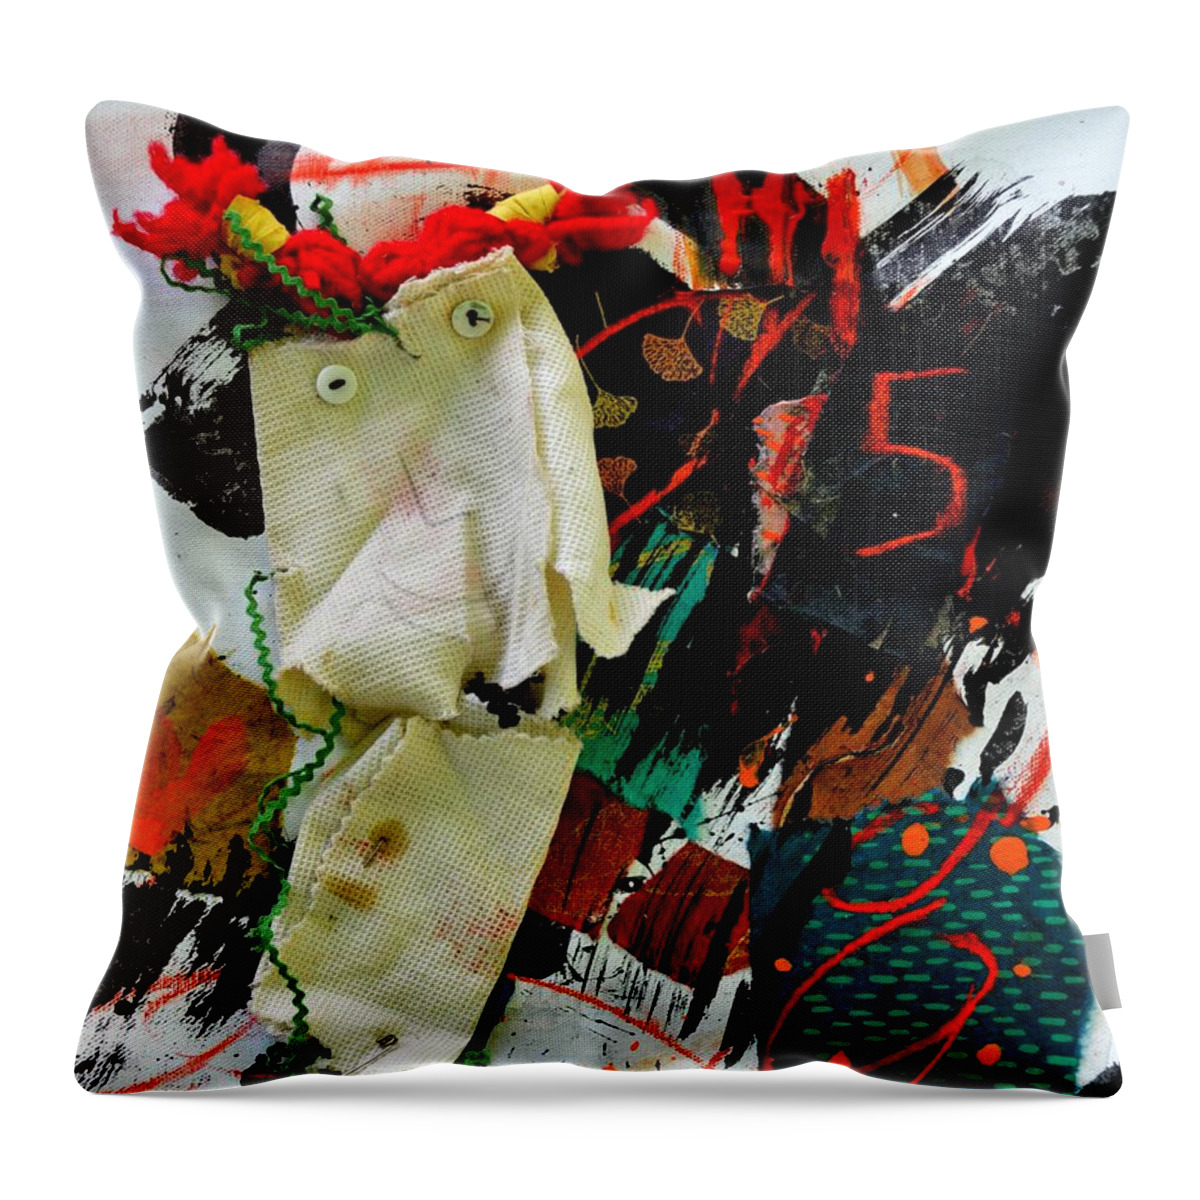 Mixed Media Throw Pillow featuring the mixed media Hi Five by Janis Kirstein